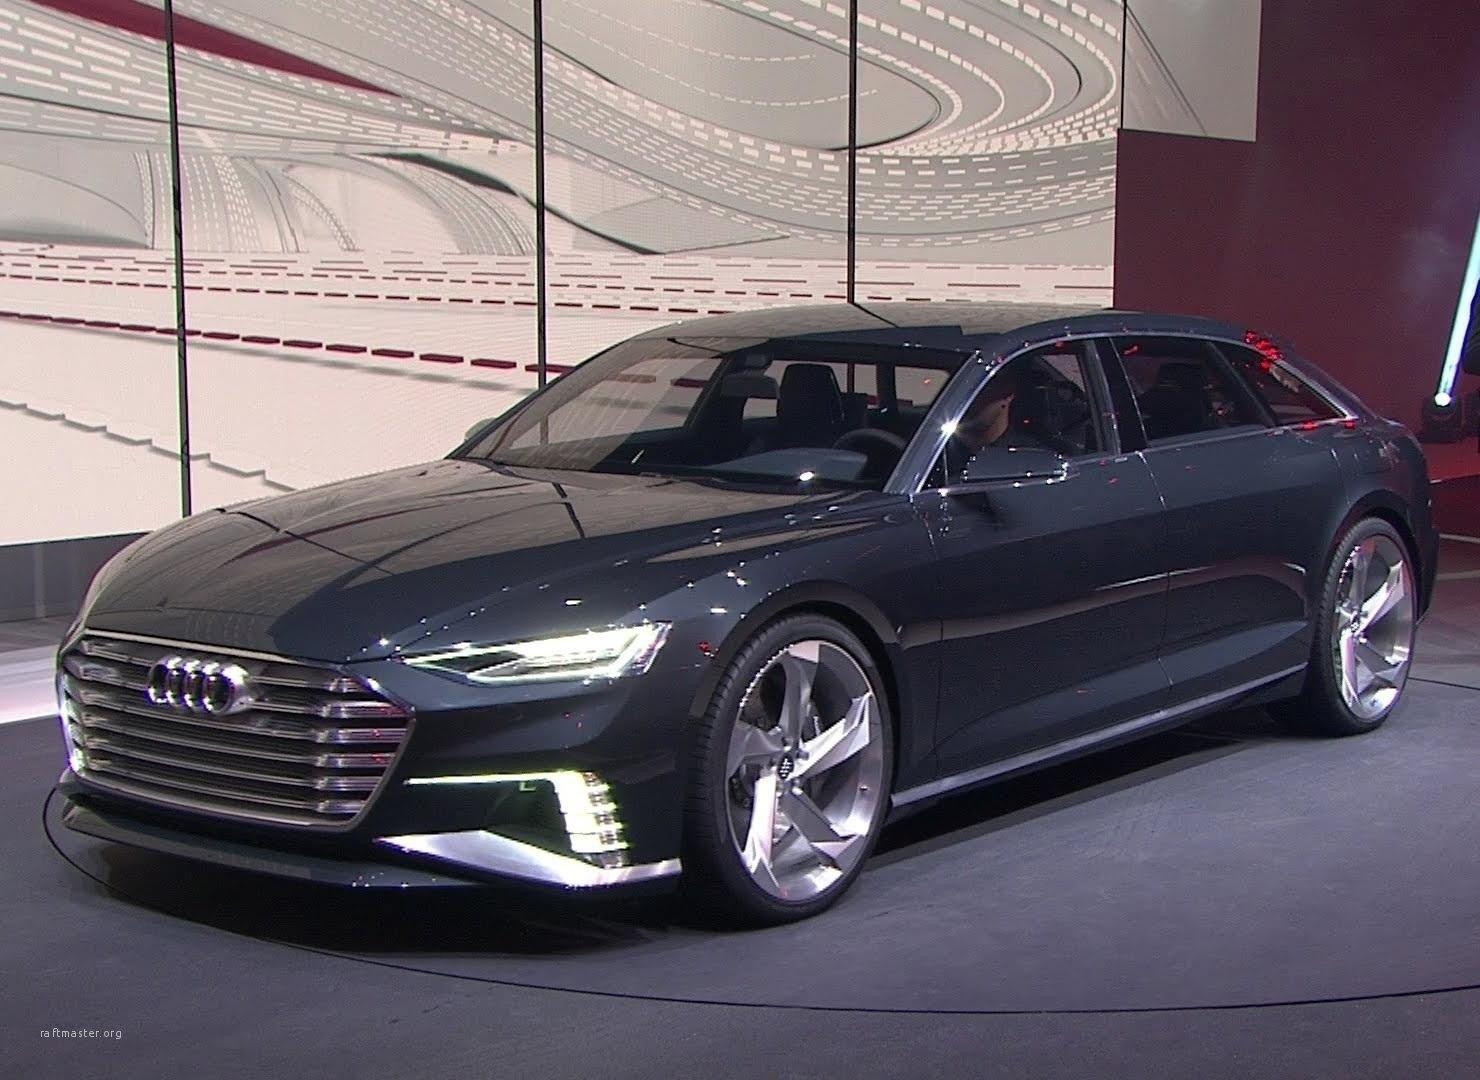 Audi A9 Release Date Wallpaper. Car News and Car Reviews